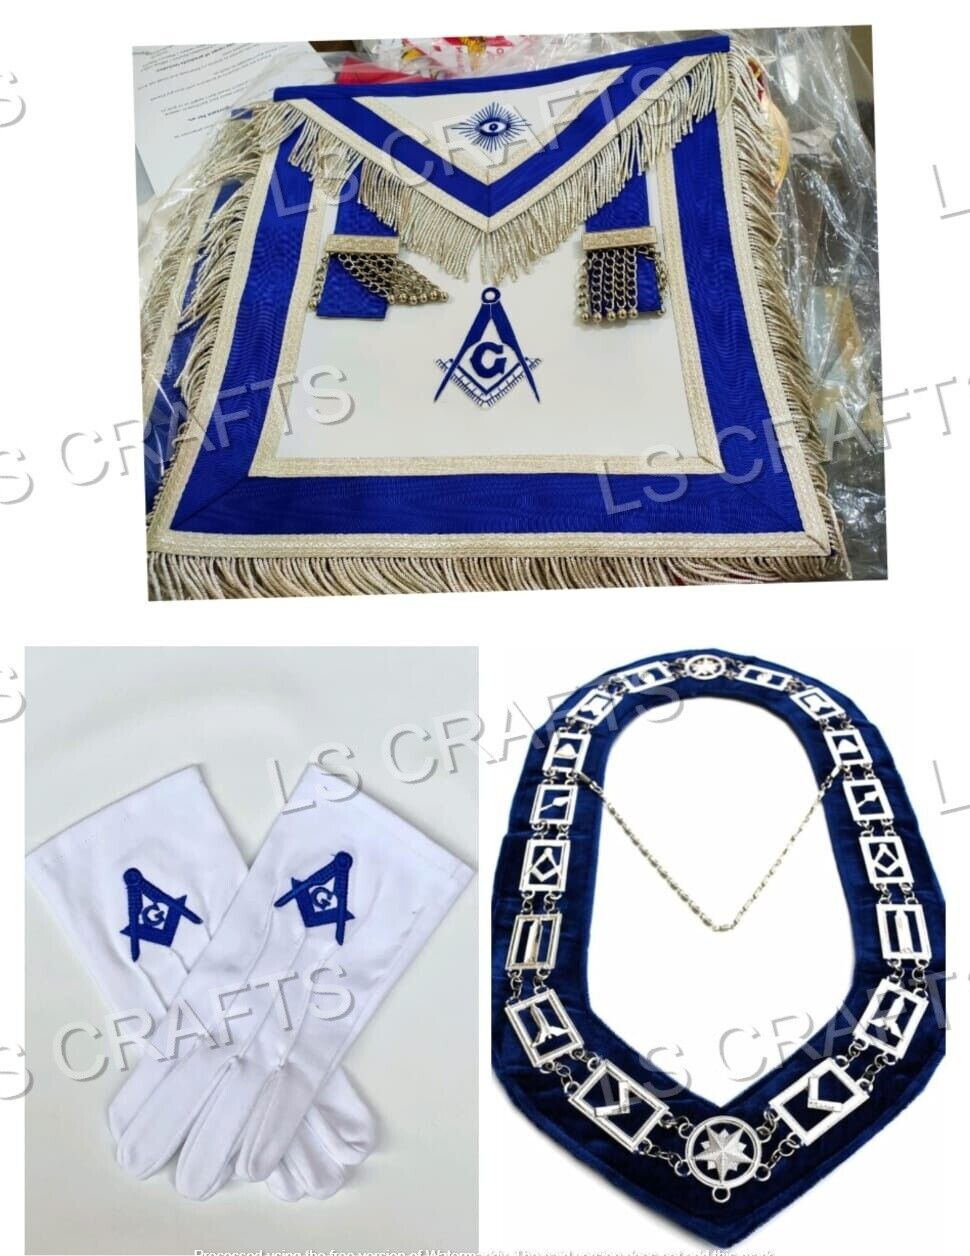 Masonic blue lodge set of apron, chain collar and square compass gloves